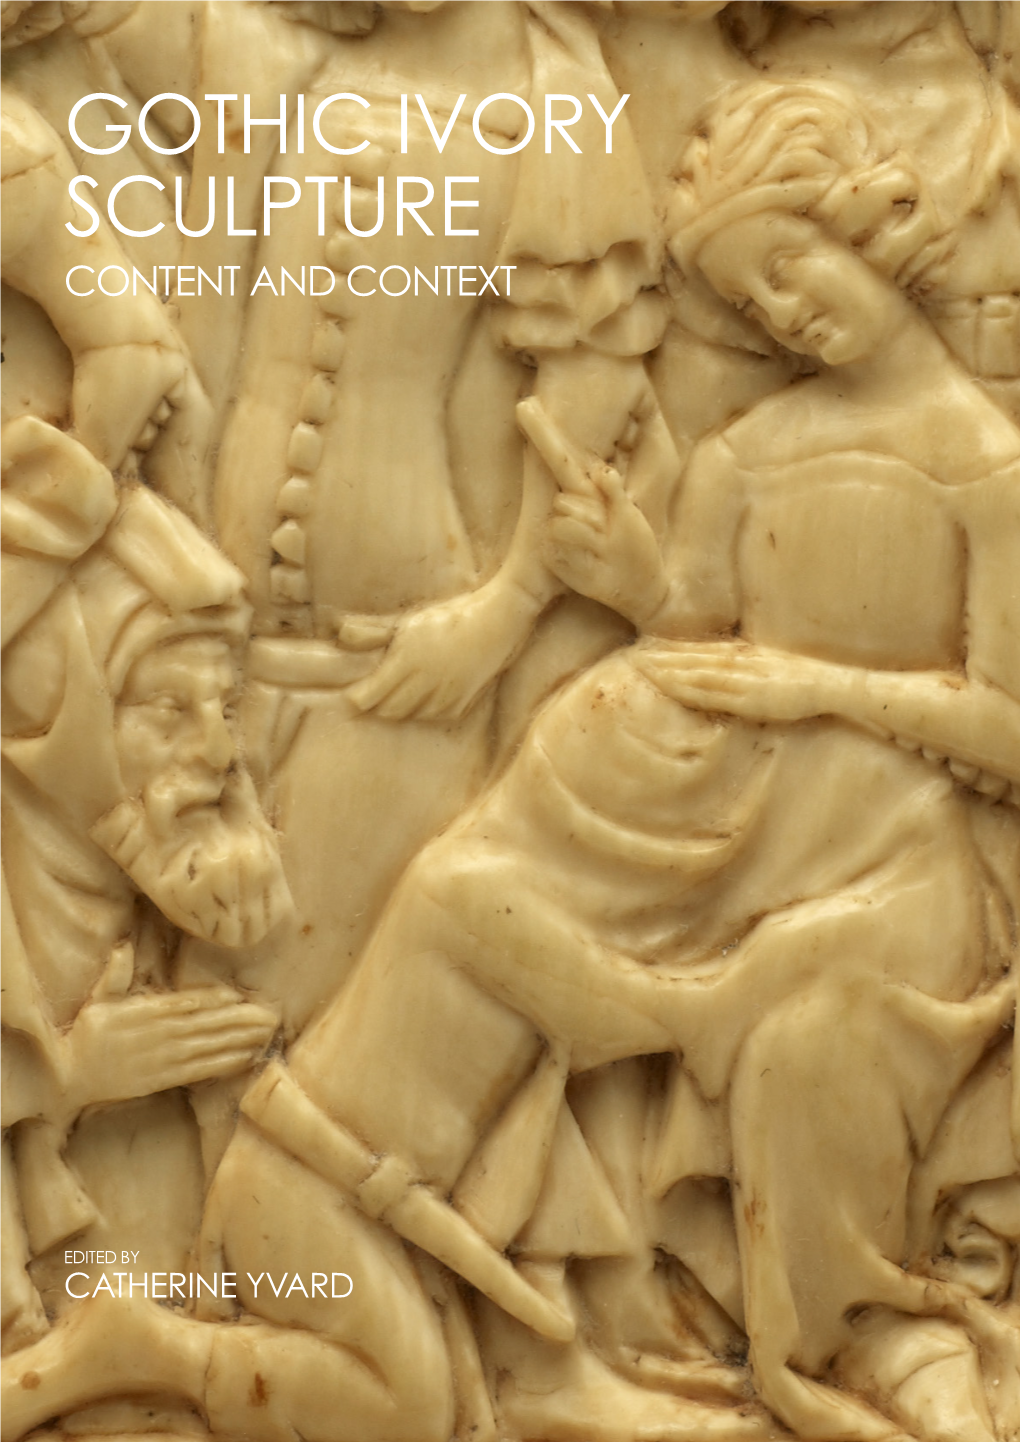 Gothic Ivory Sculpture Content and Context